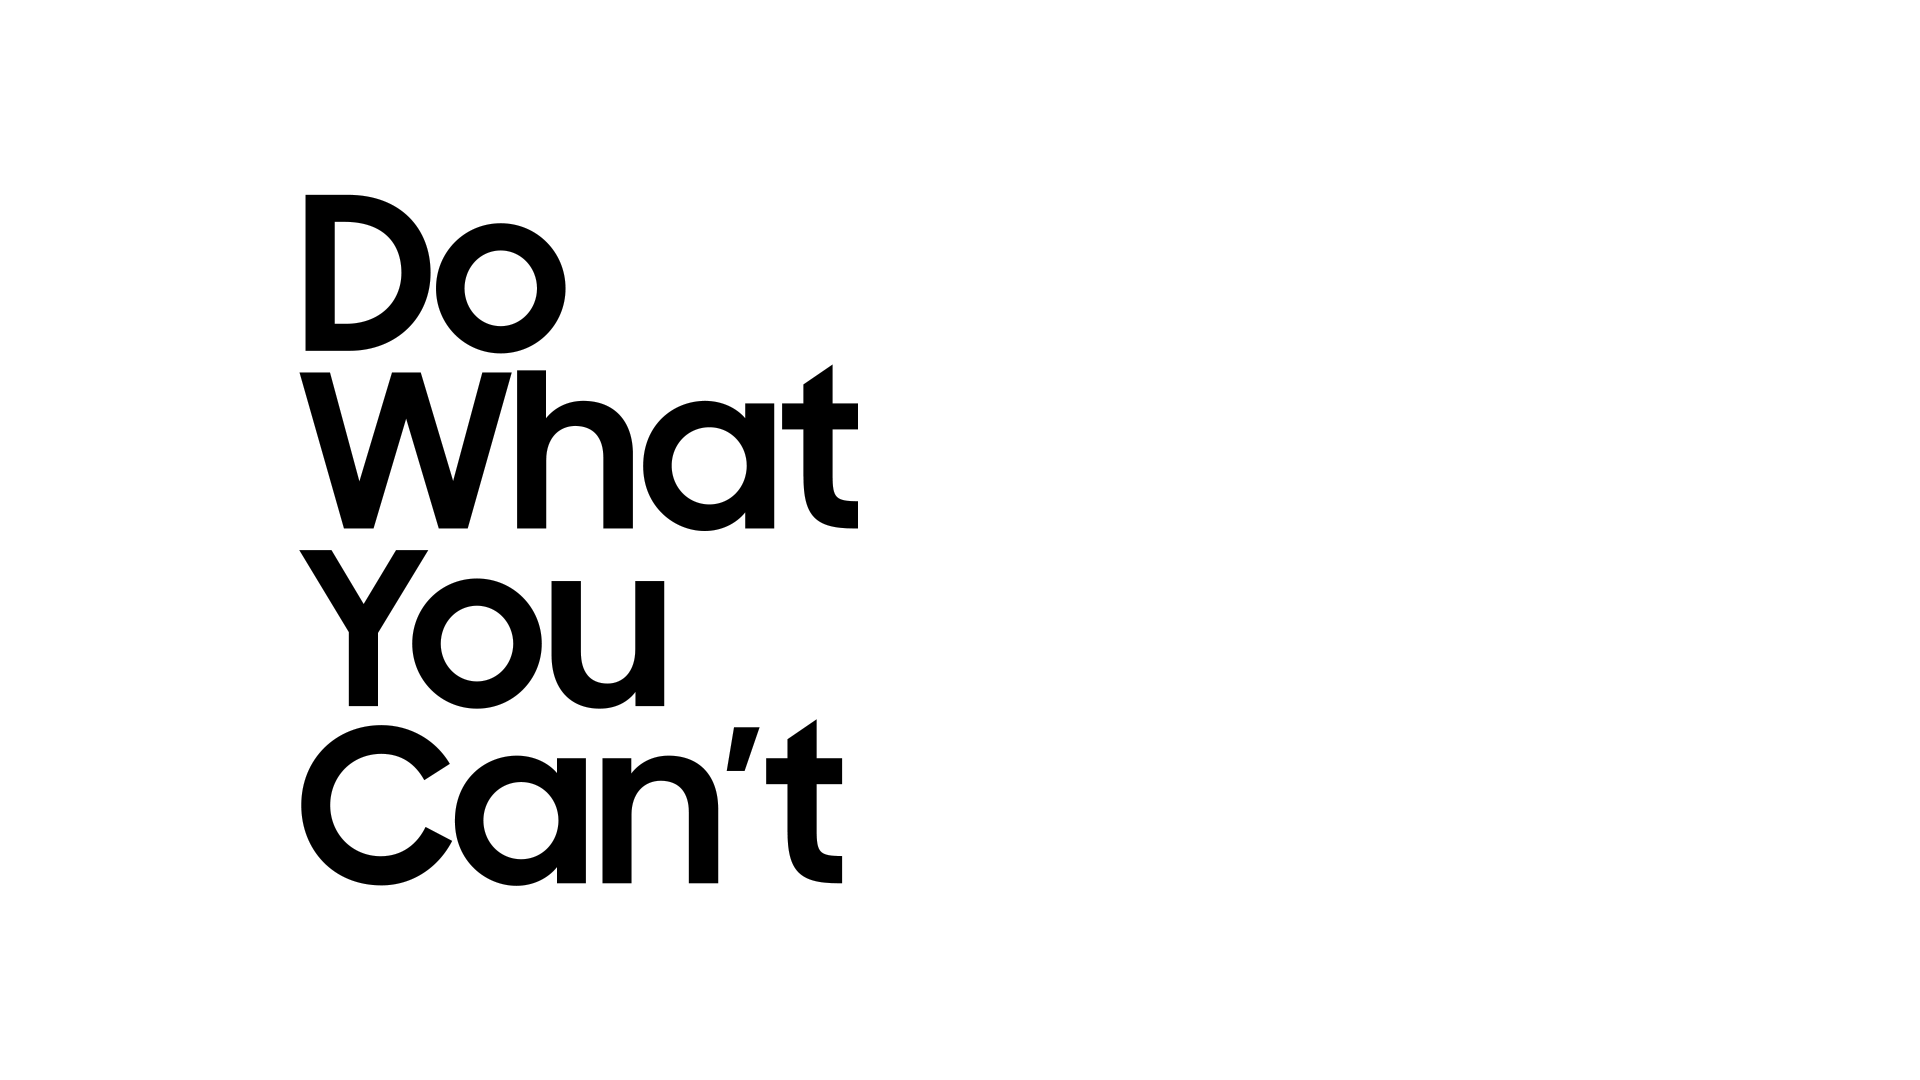 This company you can. Do what you can't. Samsung do what you can't. What can you do. You can.